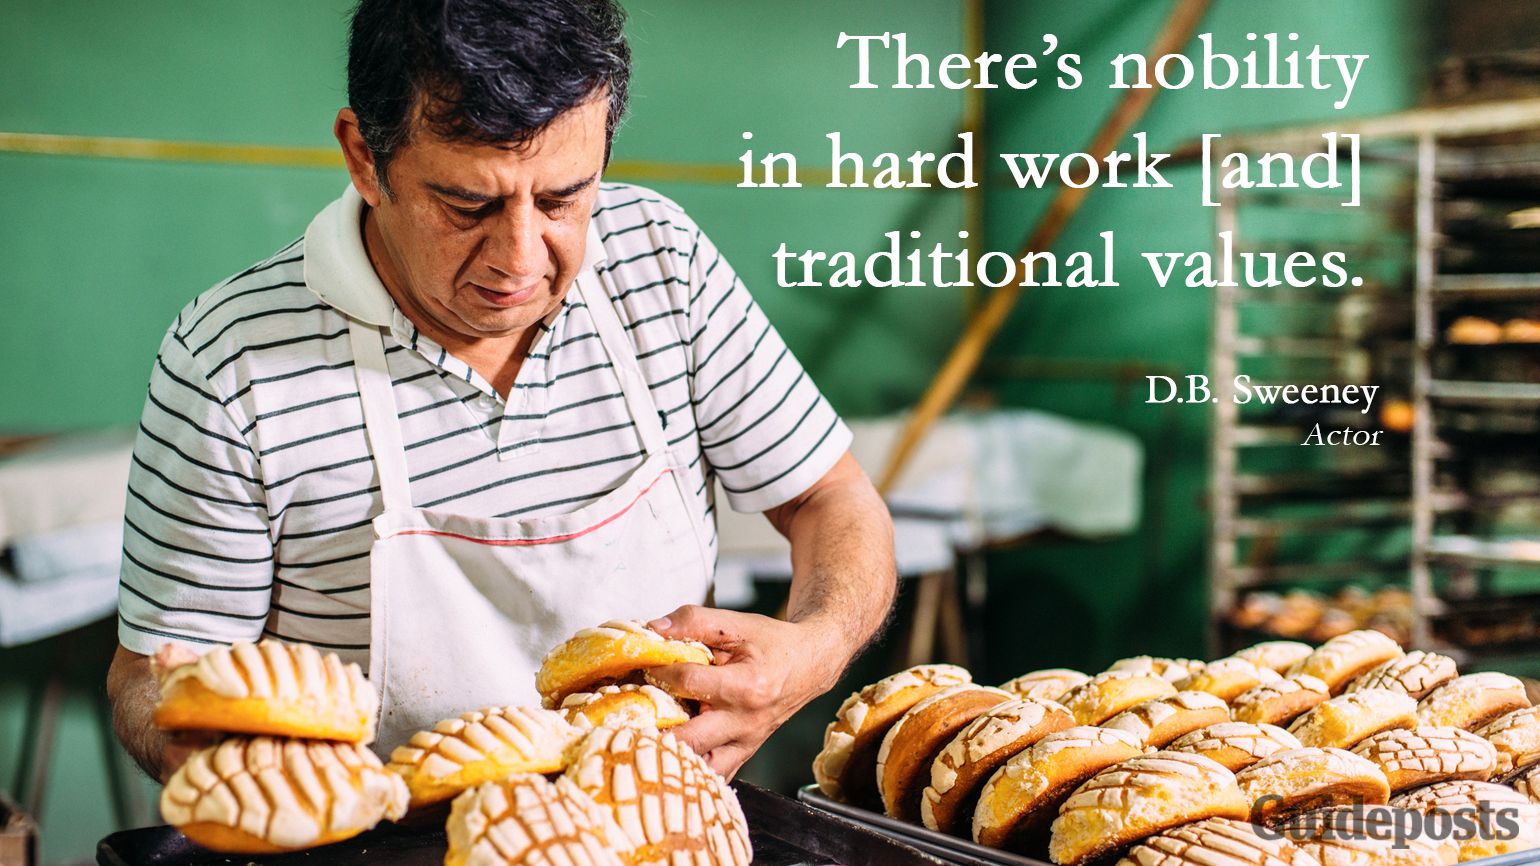 Inspiring Labor Day Quotes: There’s nobility in hard work [and] traditional values. D.B. Sweeney better living life advice